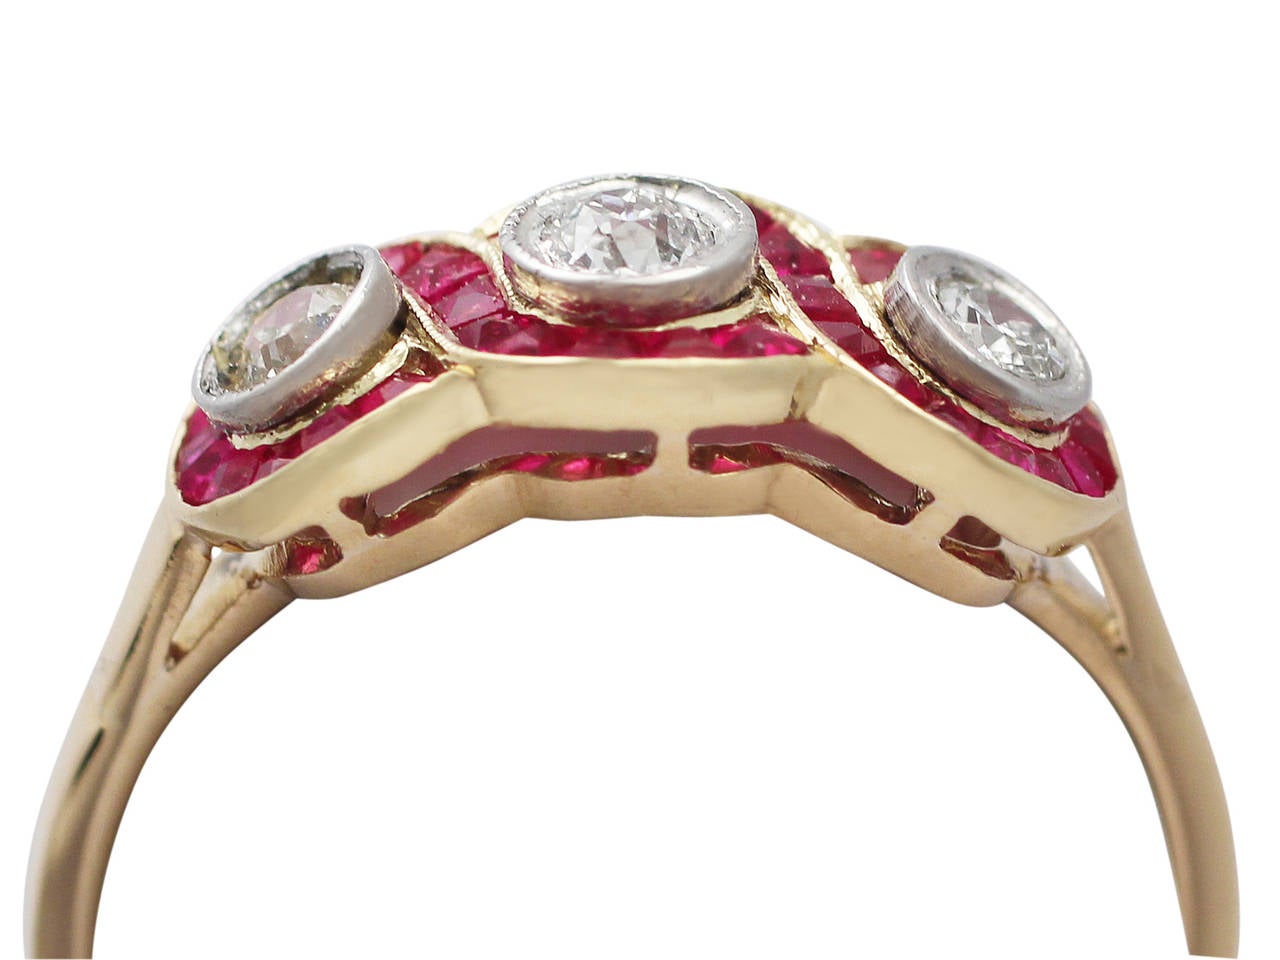 A fine and impressive antique French 0.33 carat natural ruby and 0.32 carat diamond, 18 karat yellow gold, platinum set dress ring; part of our antique jewelry and estate jewelry collections

This impressive antique diamond and ruby dress ring has